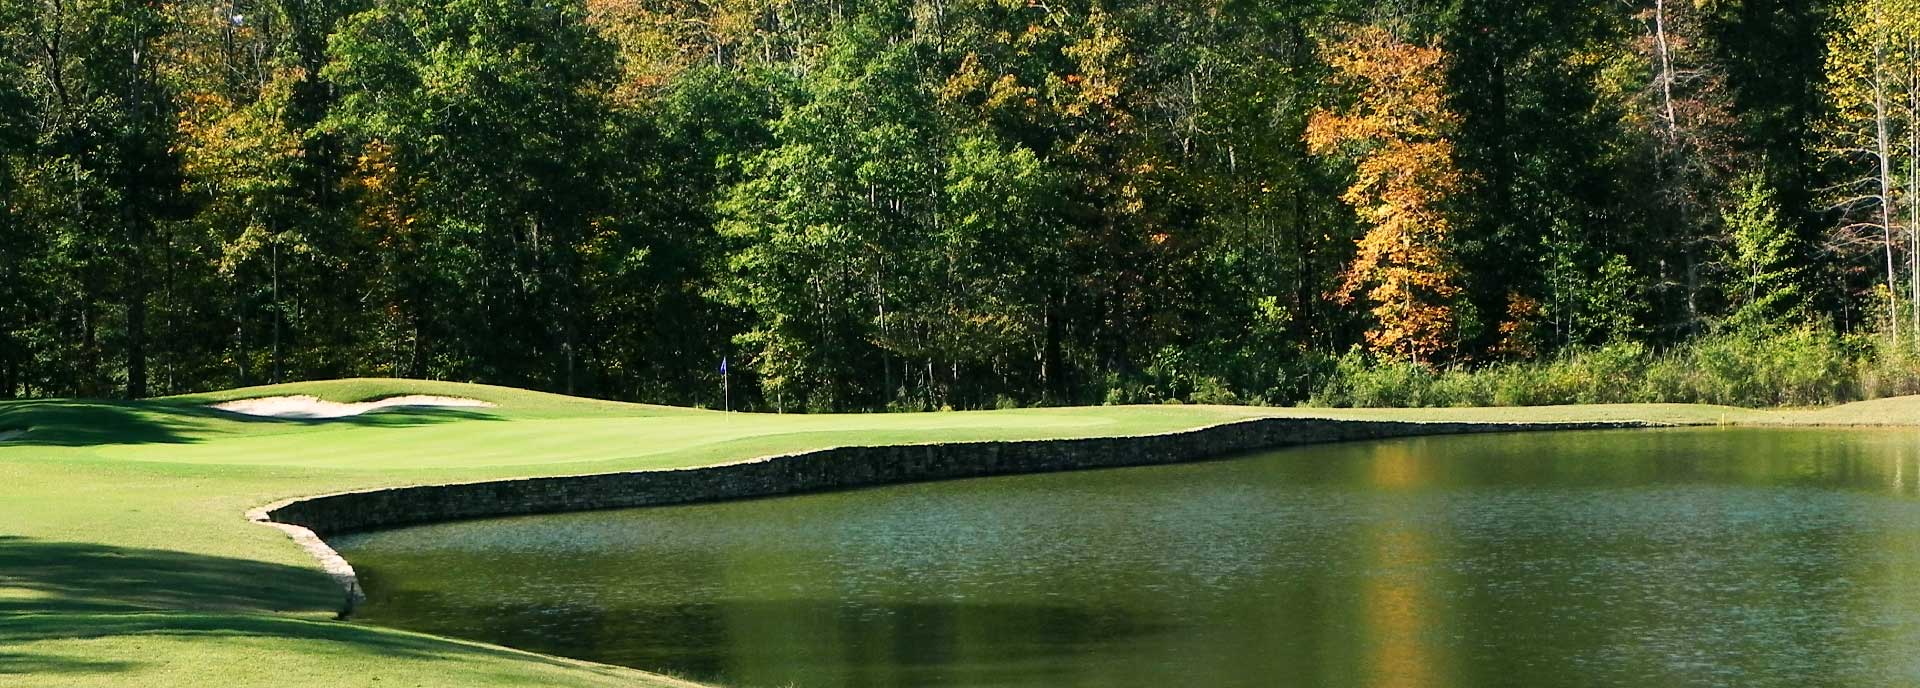 pond on golf course